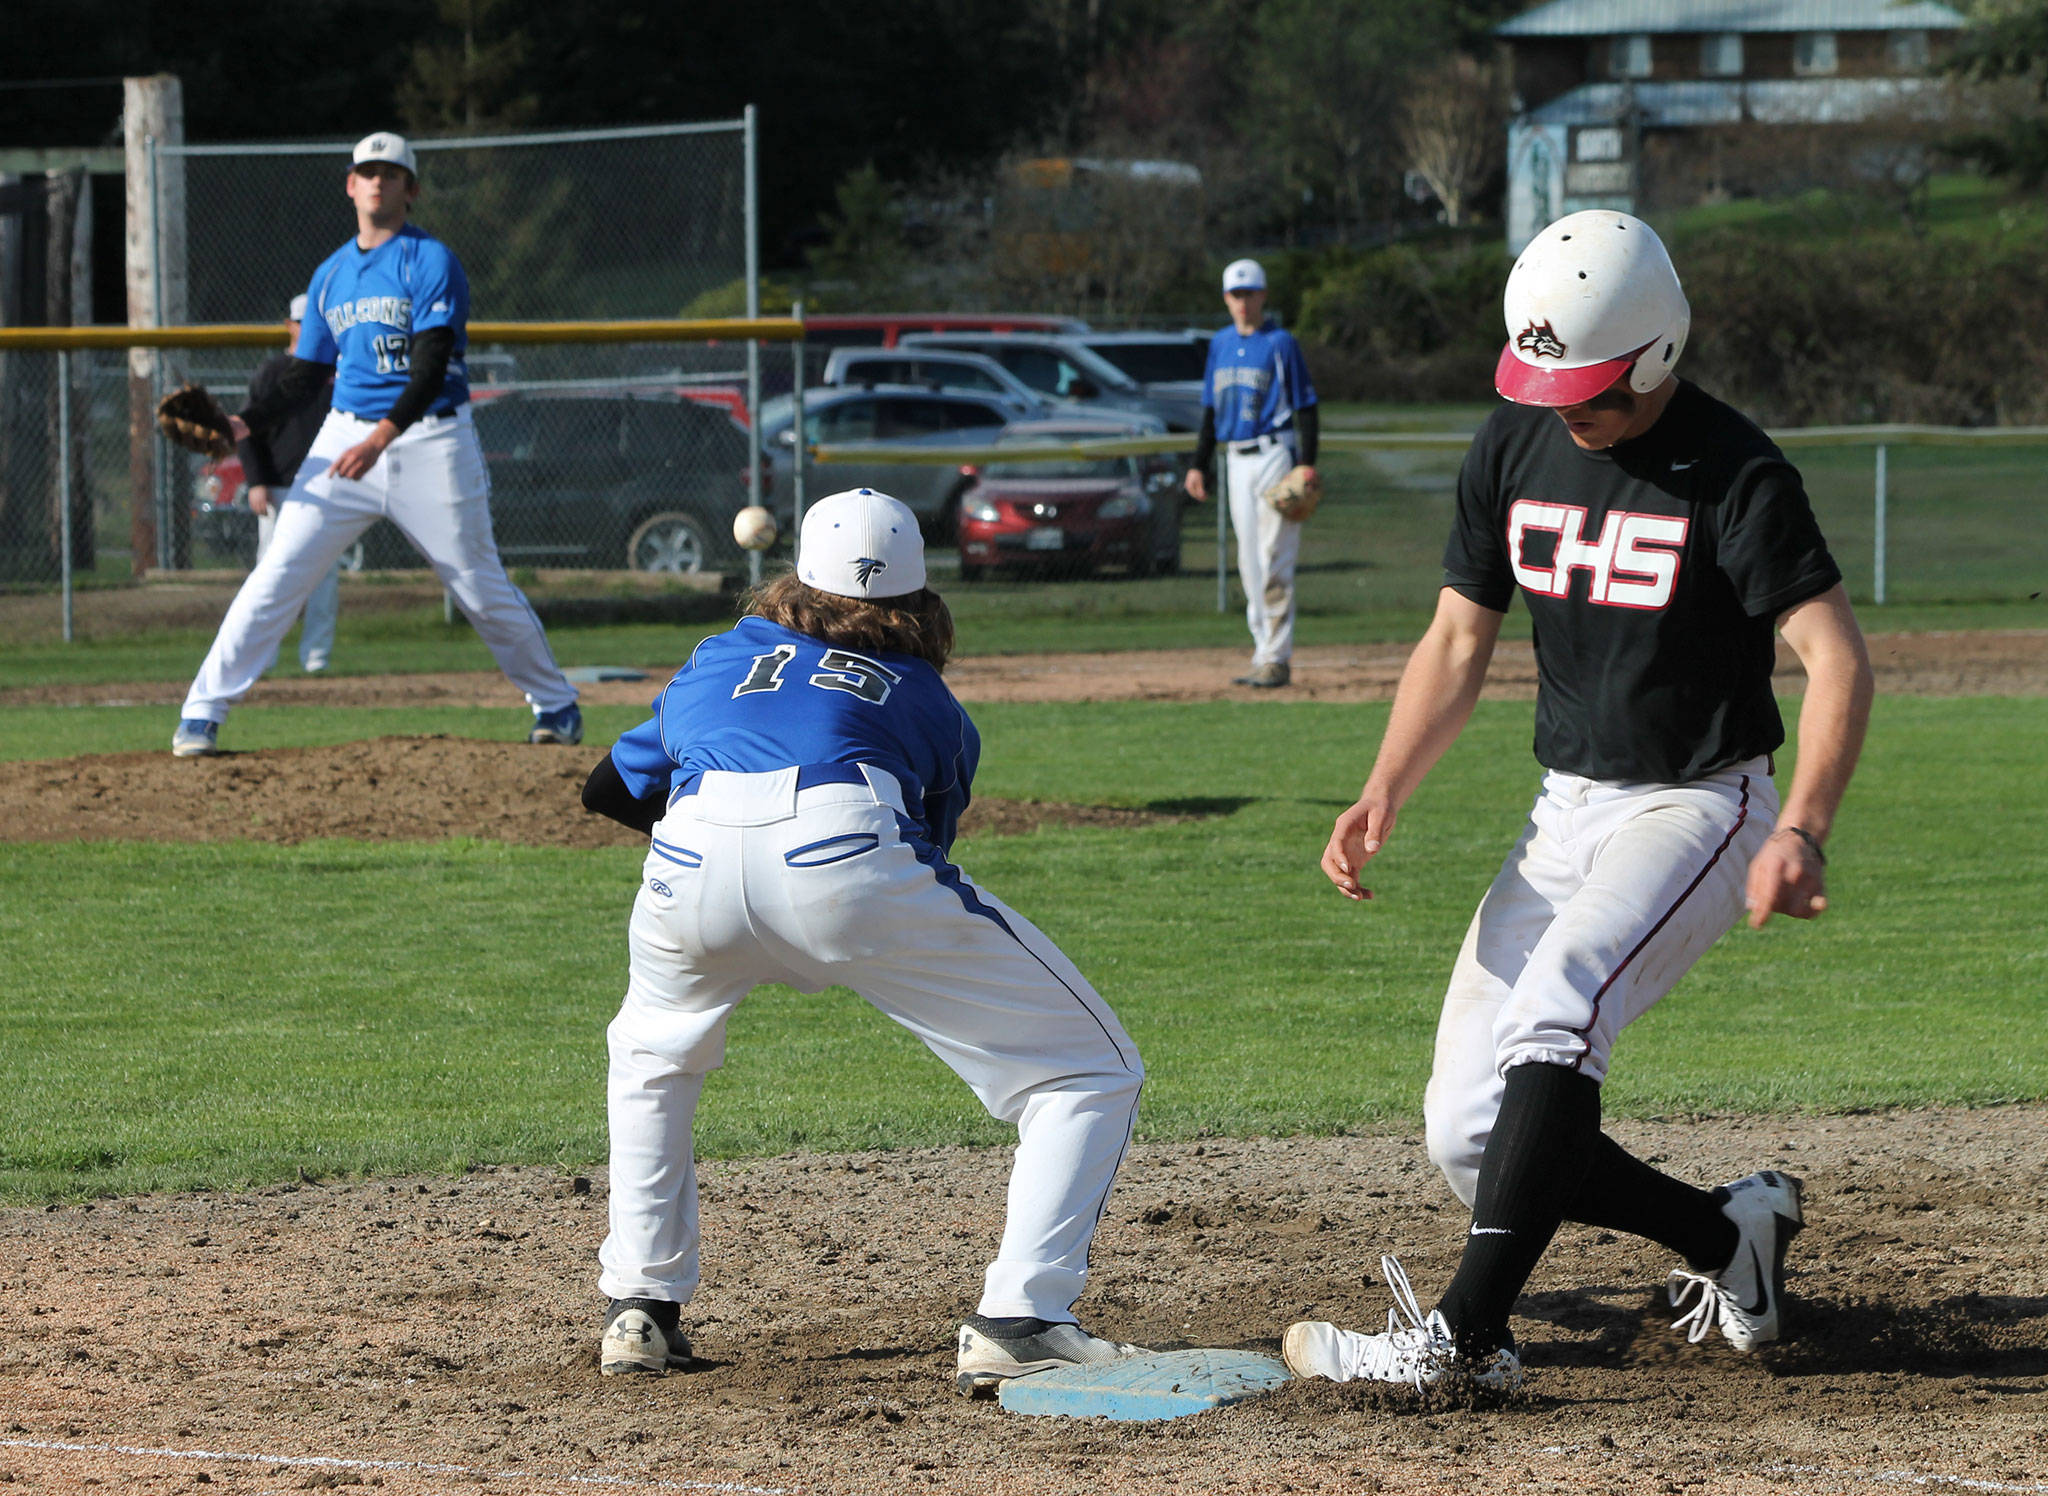 Falcon pitcher Brent Batchelor throws to first baseman Nick Young in an attempt to pick off Cedarcrest’s Aaron Davenport.(Photo by Jim Waller/Whidbey News Group)